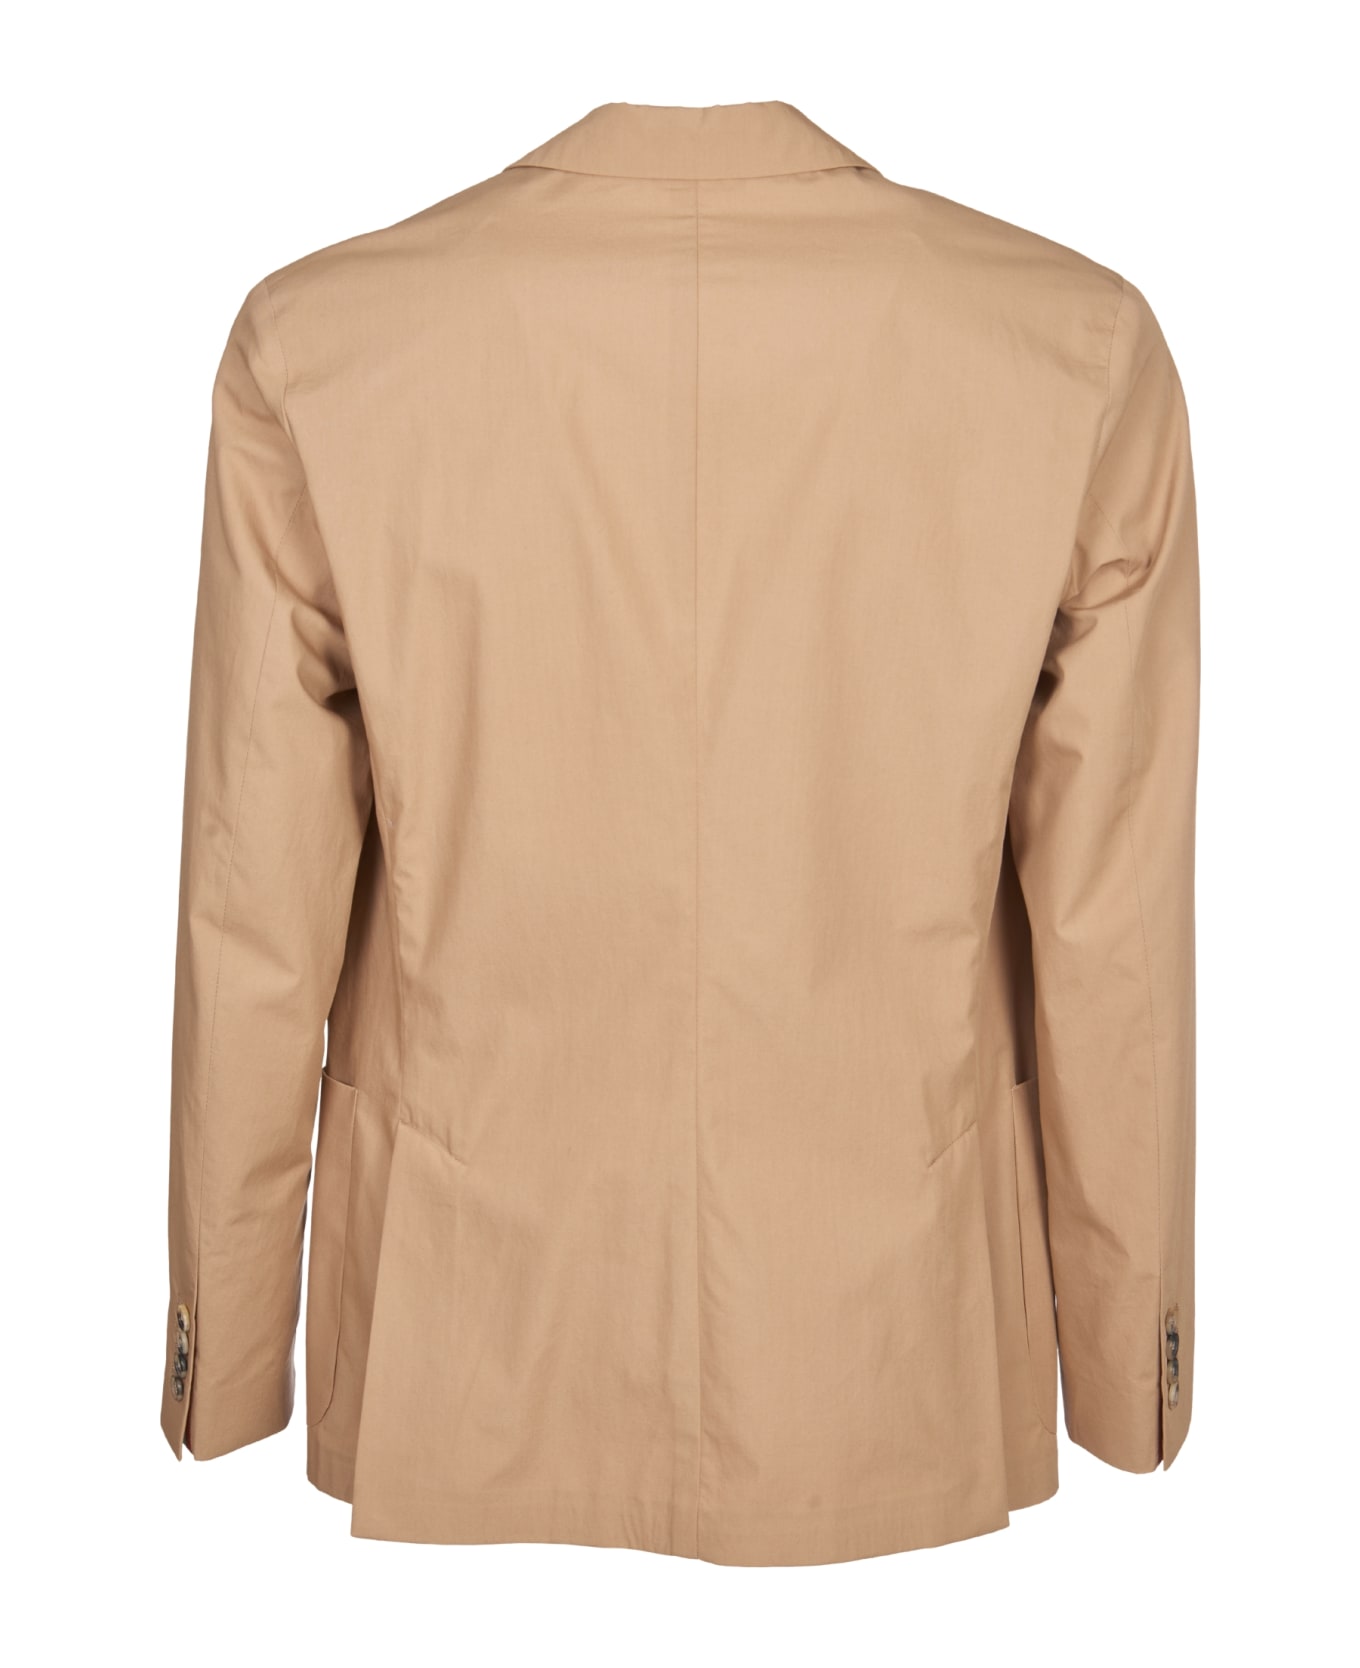 Paul Smith Jacket - Brown